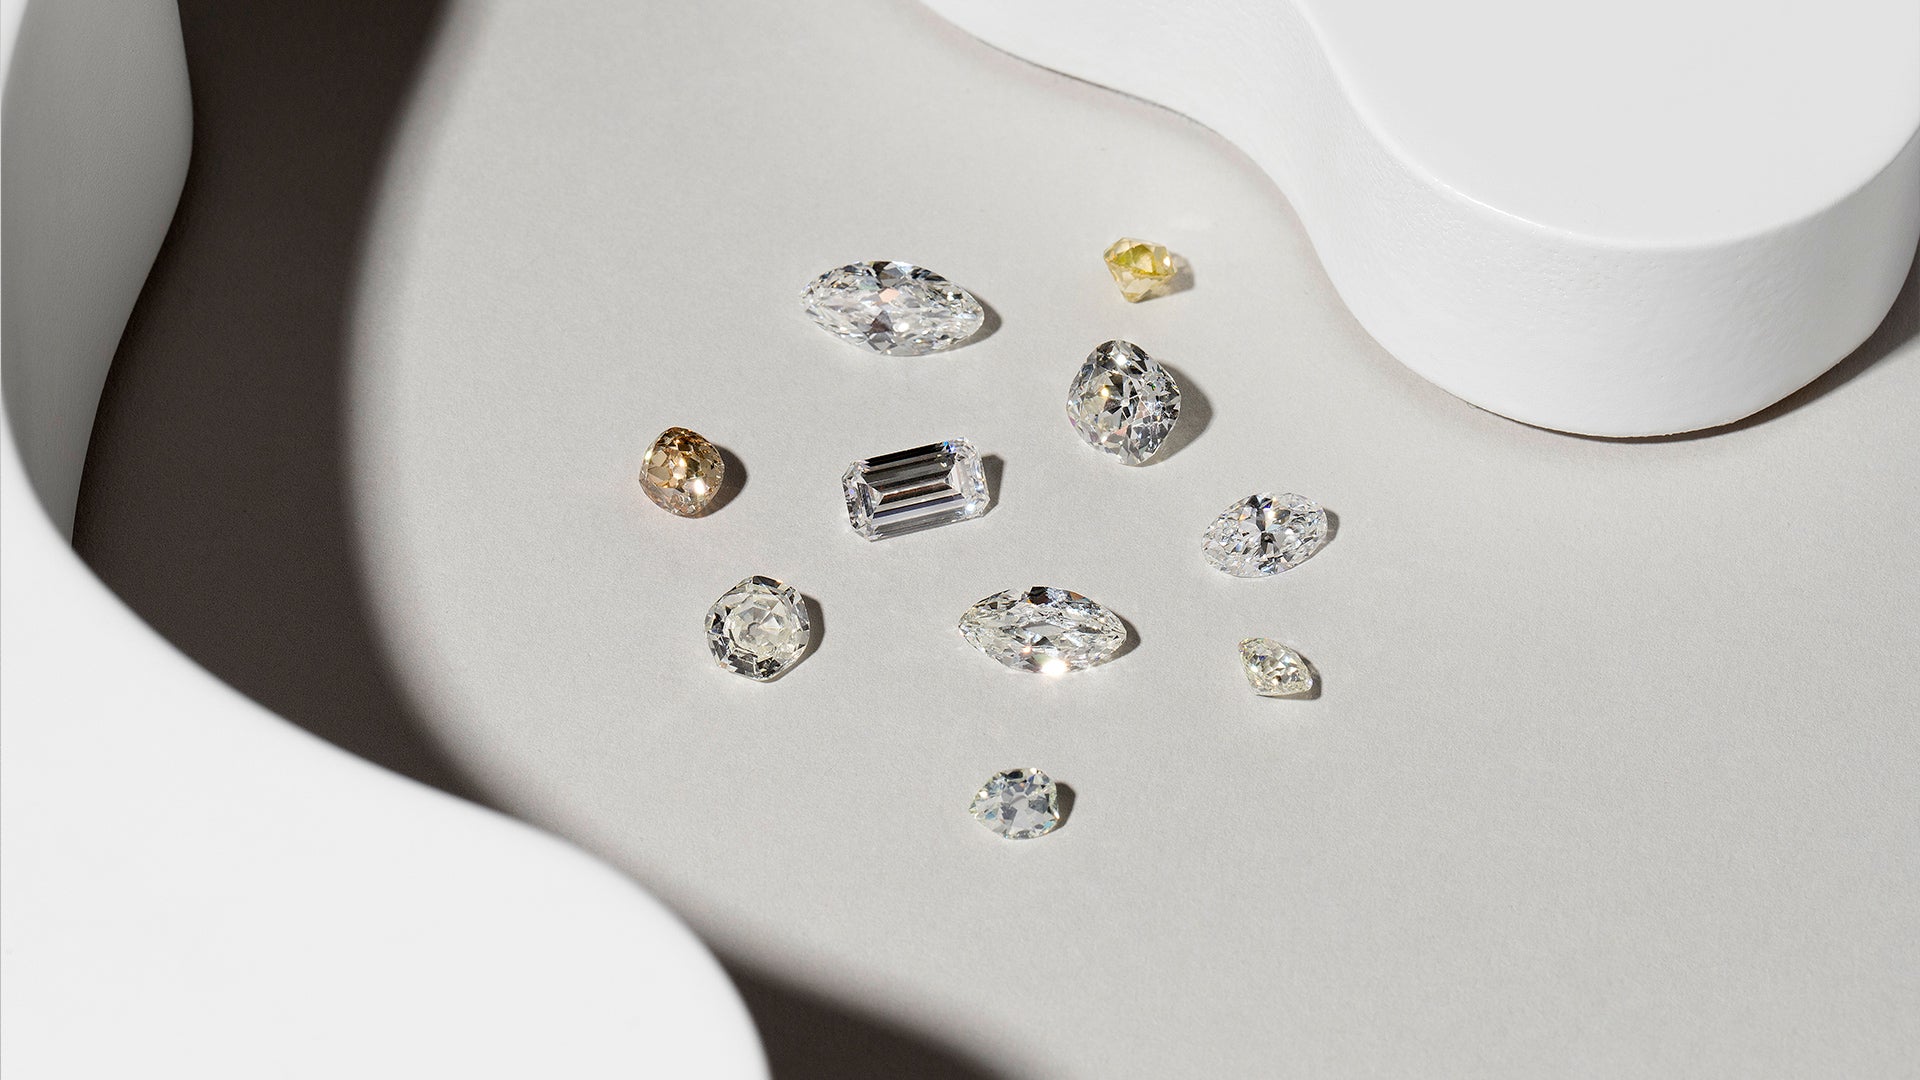 Loose diamonds in a variety of colors and cuts